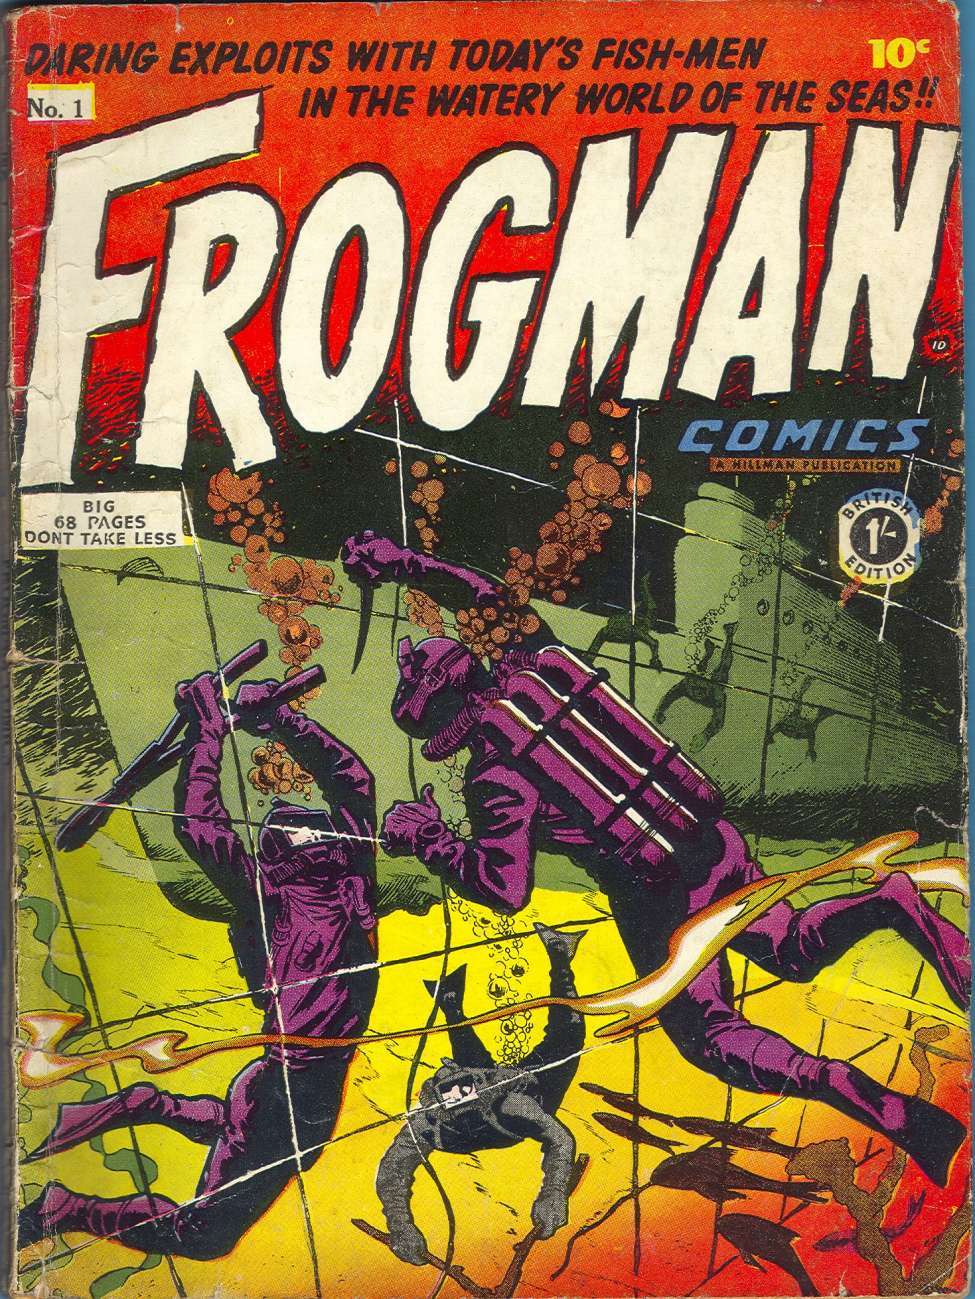 Book Cover For Frogman Comics 1 - Version 1